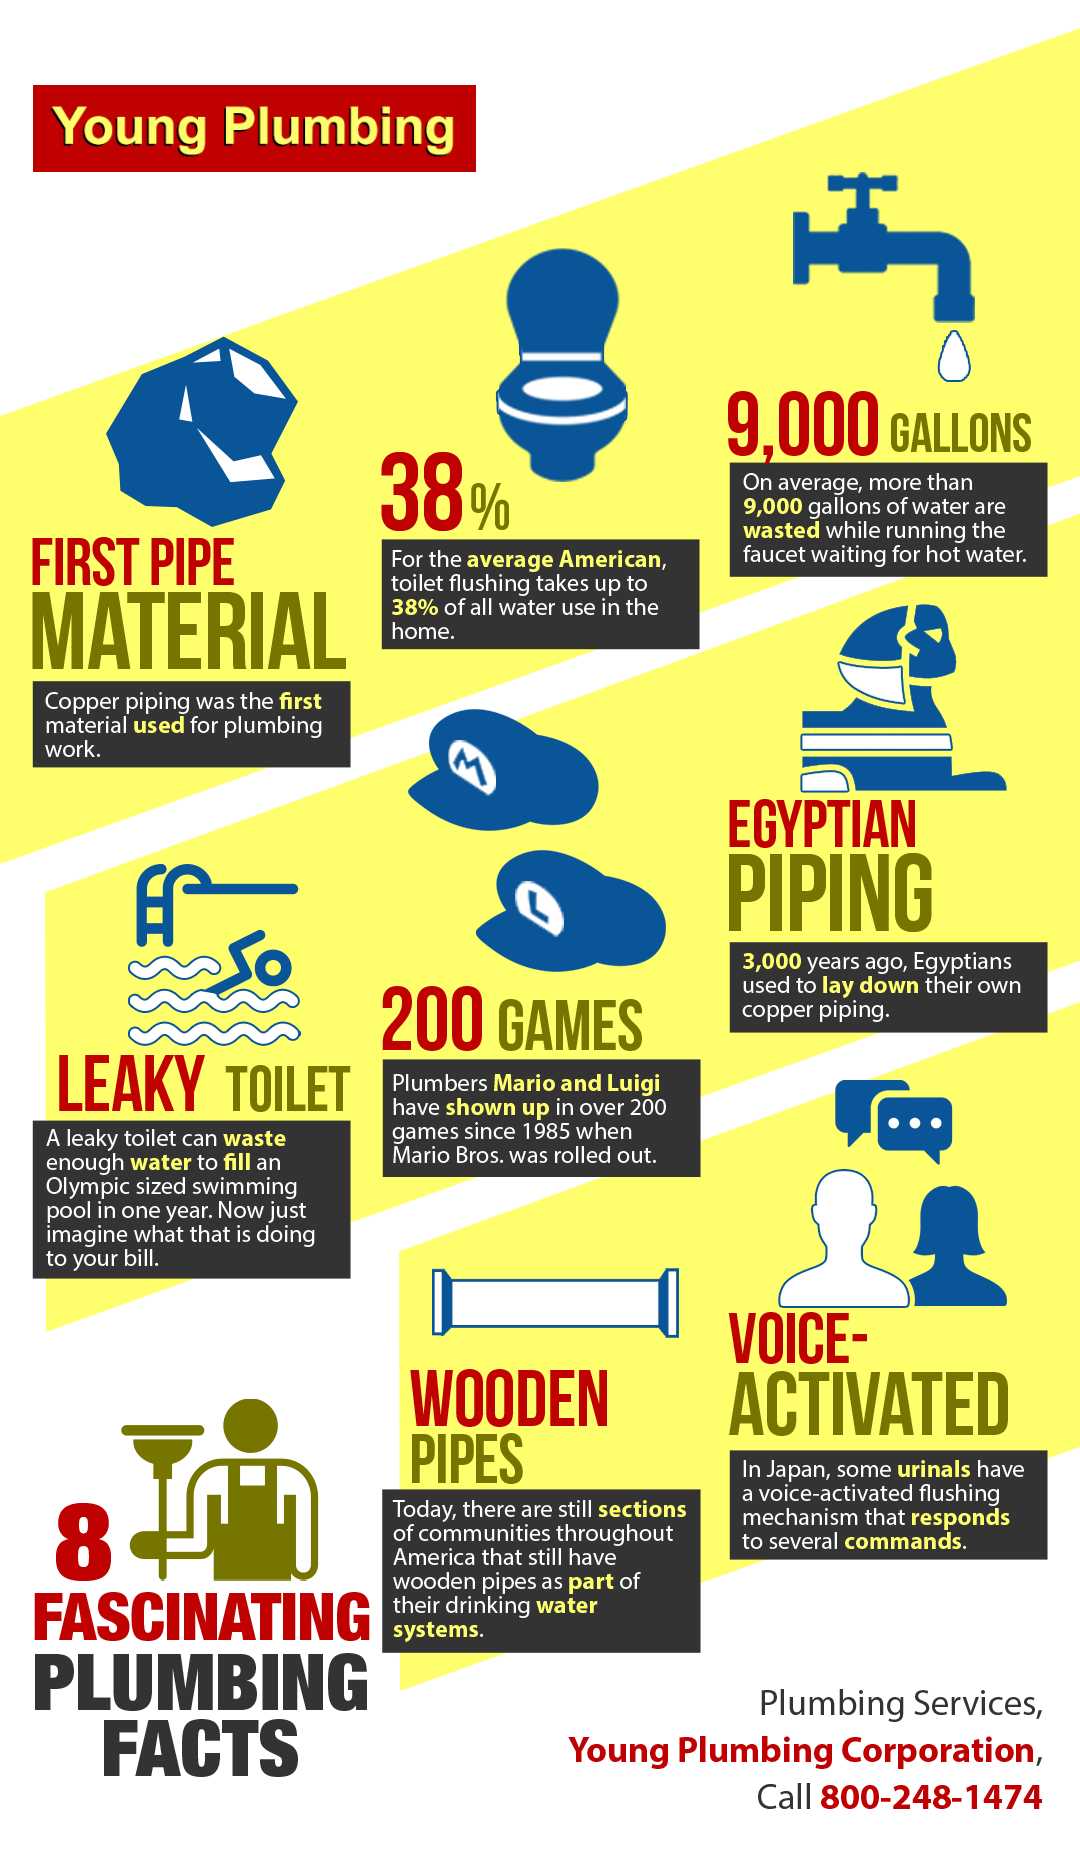 8 Fascinating Plumbing Facts Shared Info Graphics